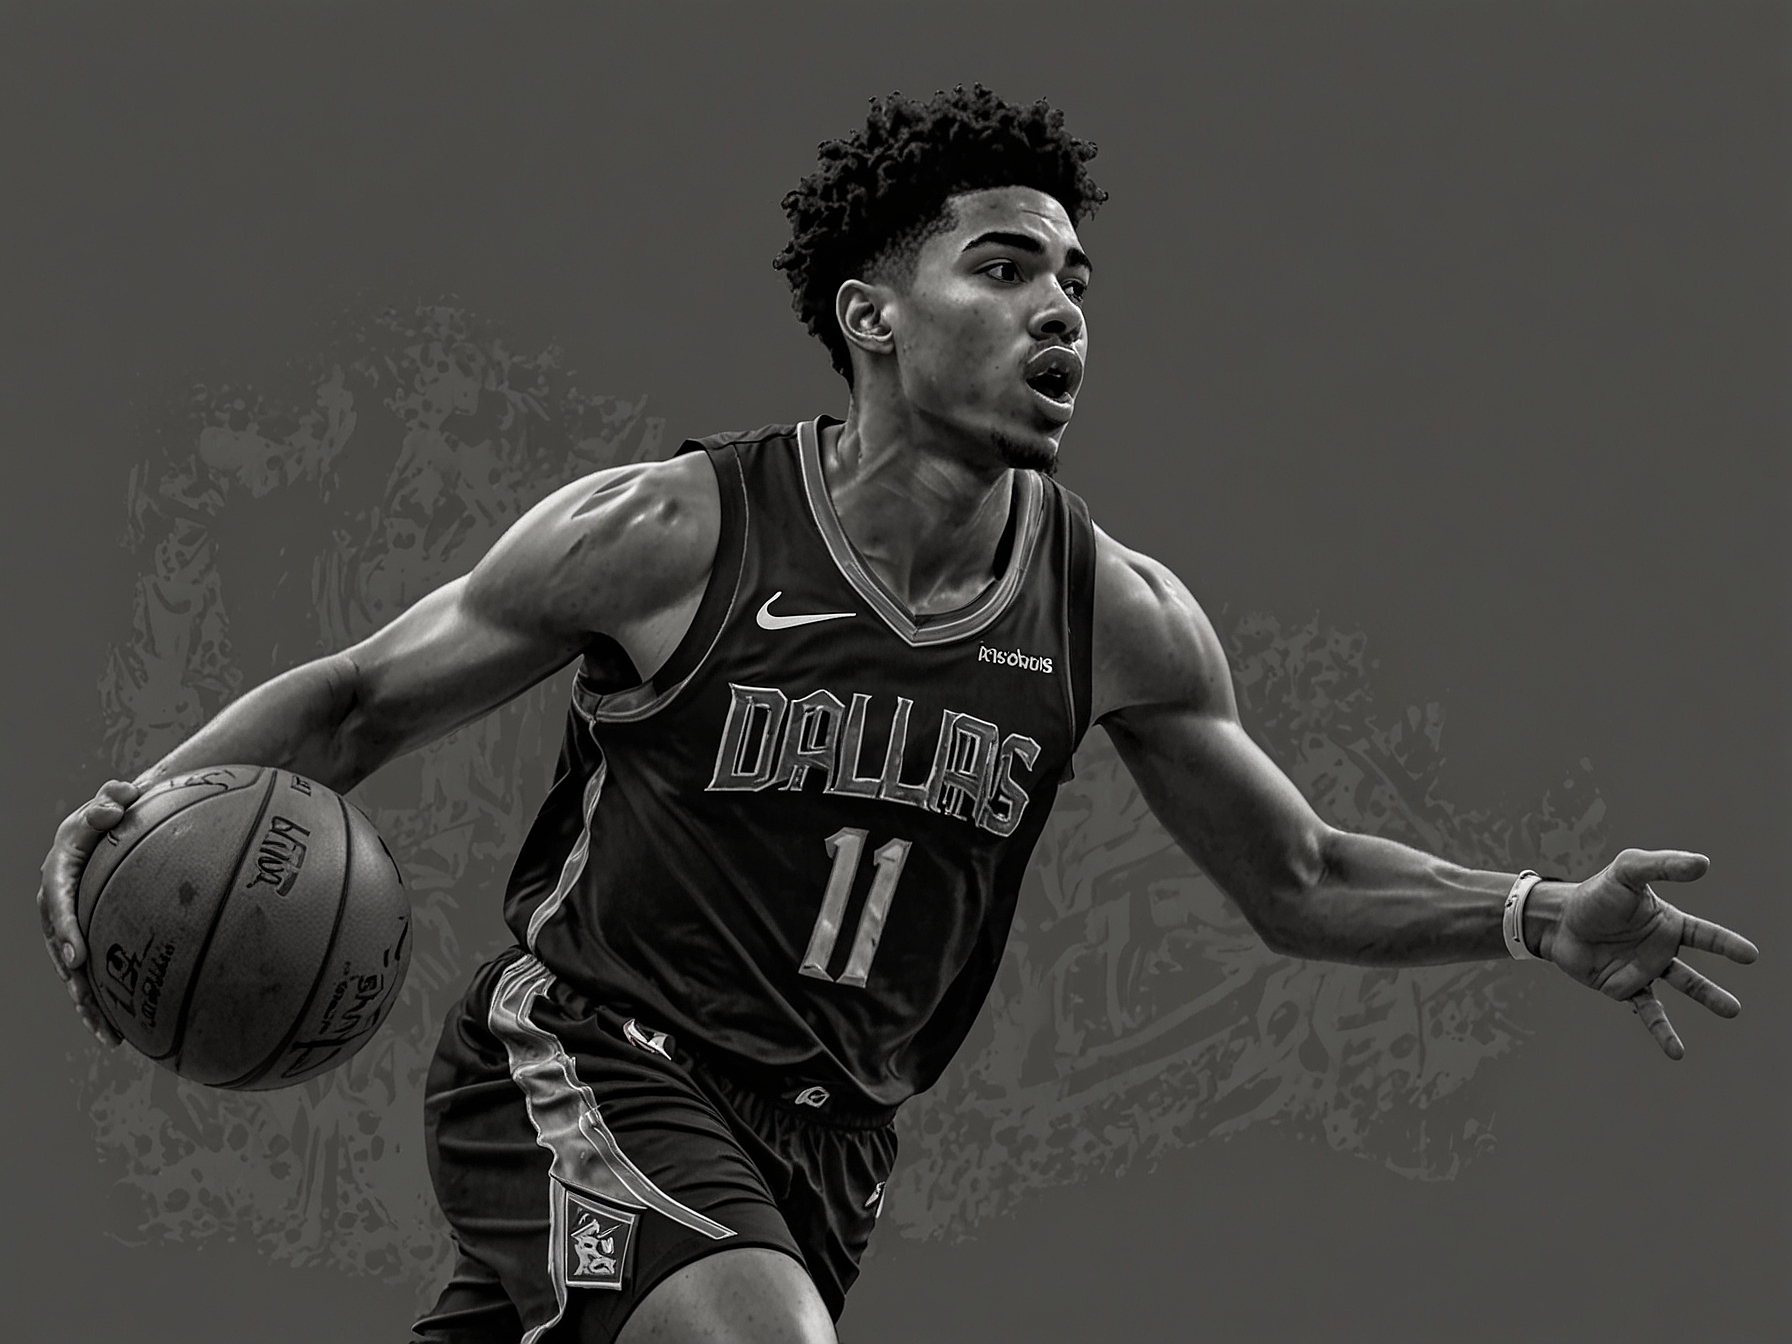 Quentin Grimes in action on the court, showcasing his defensive skills and versatility, representing his potential impact as a new member of the Dallas Mavericks.